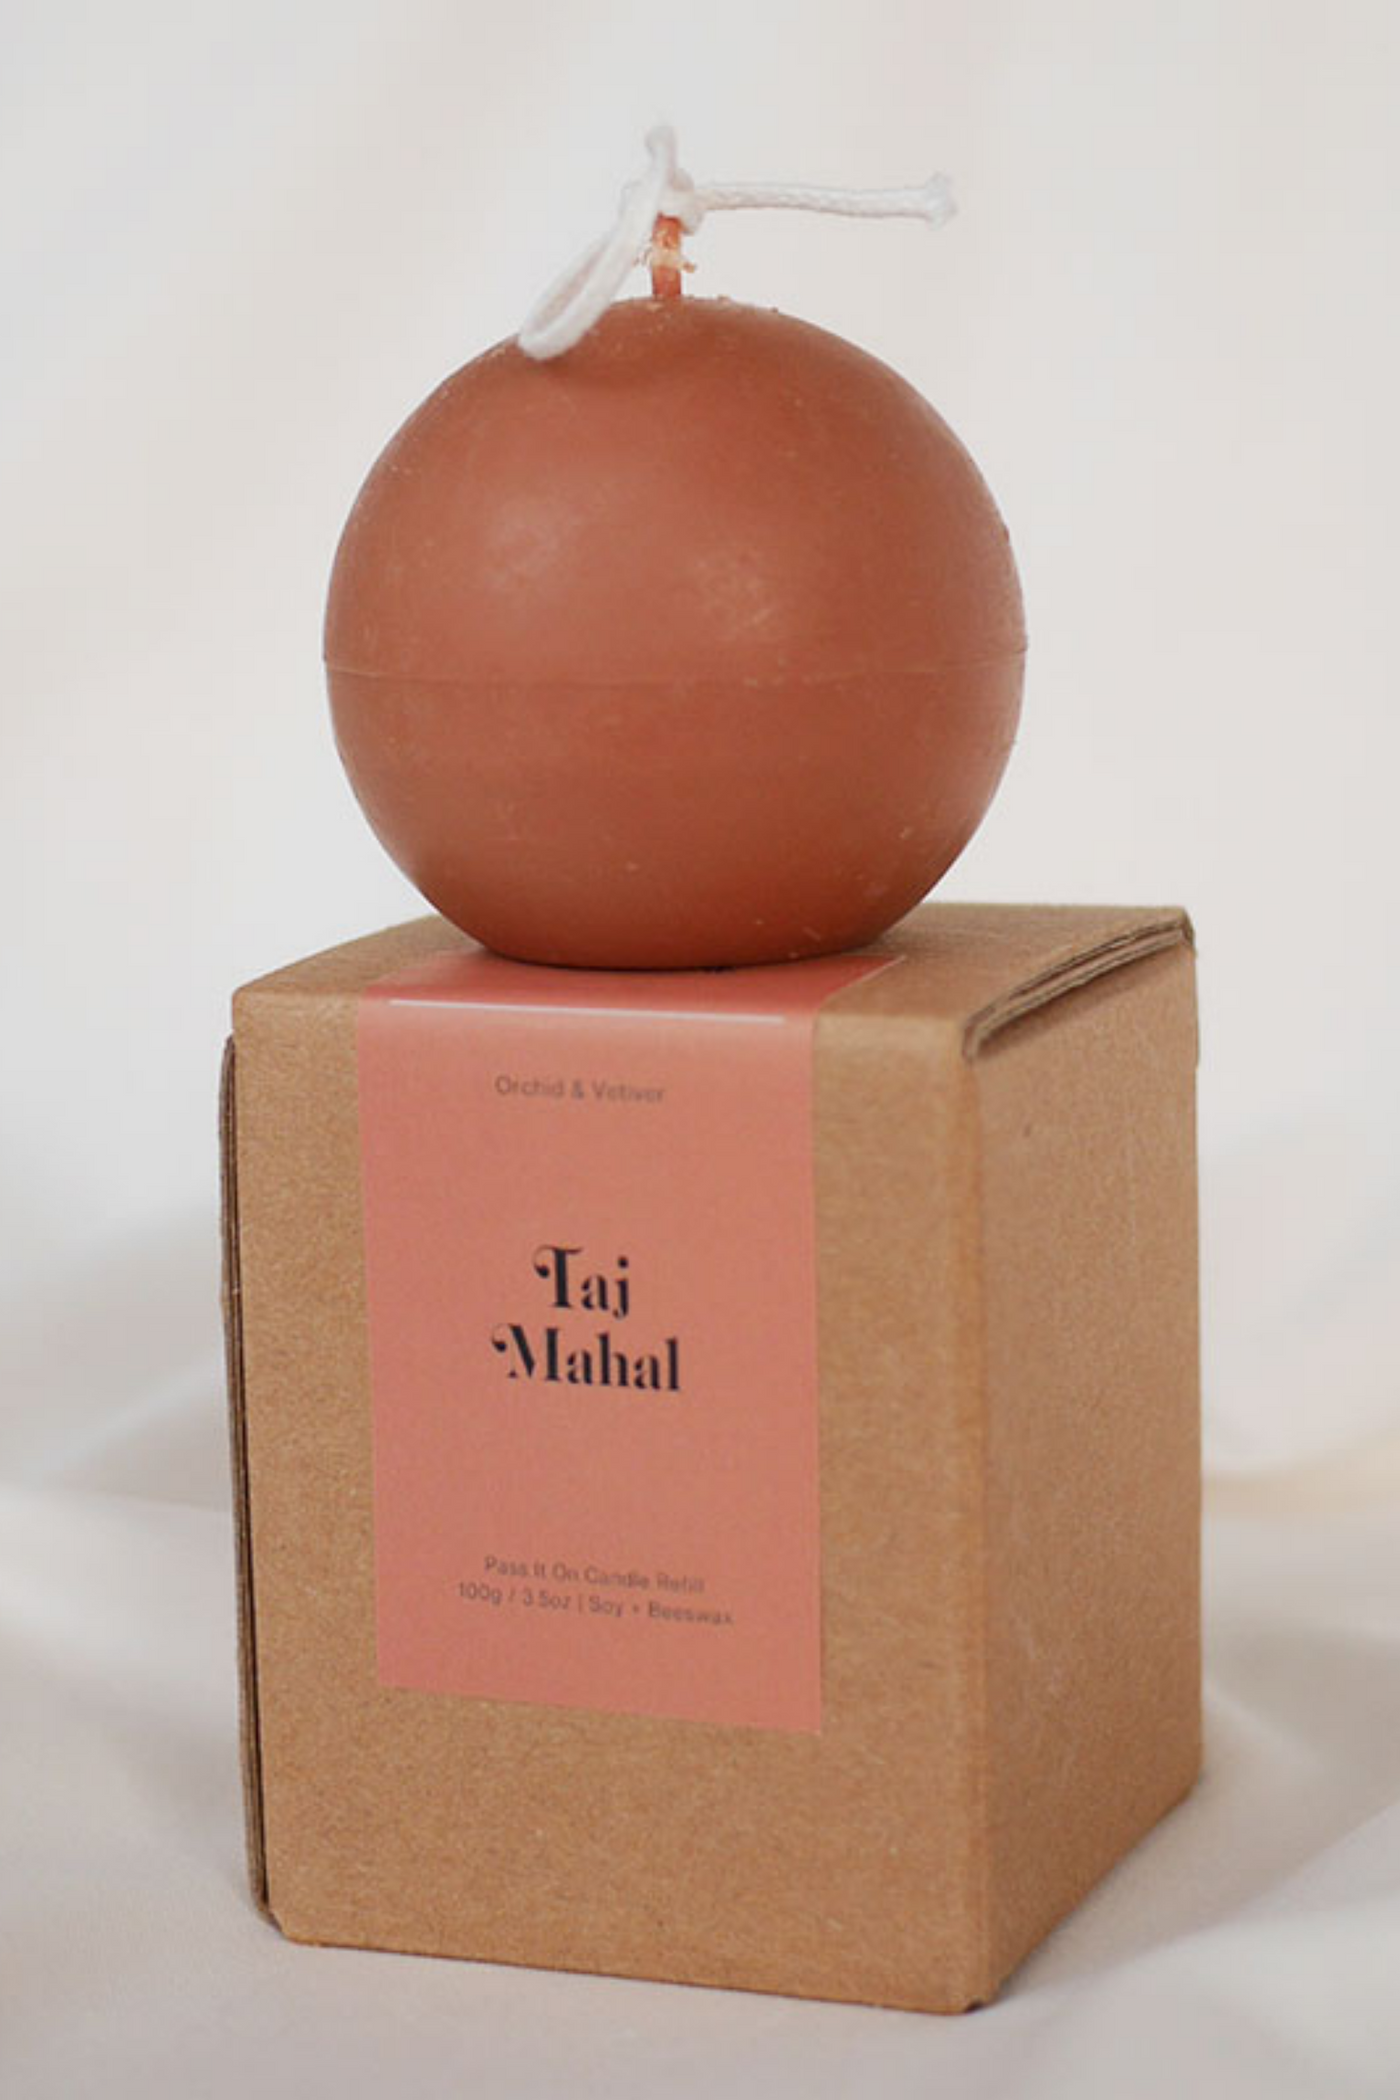 Pass It On Candle Refill in Taj Mahal (White Tea & Ginger), available on ZERRIN